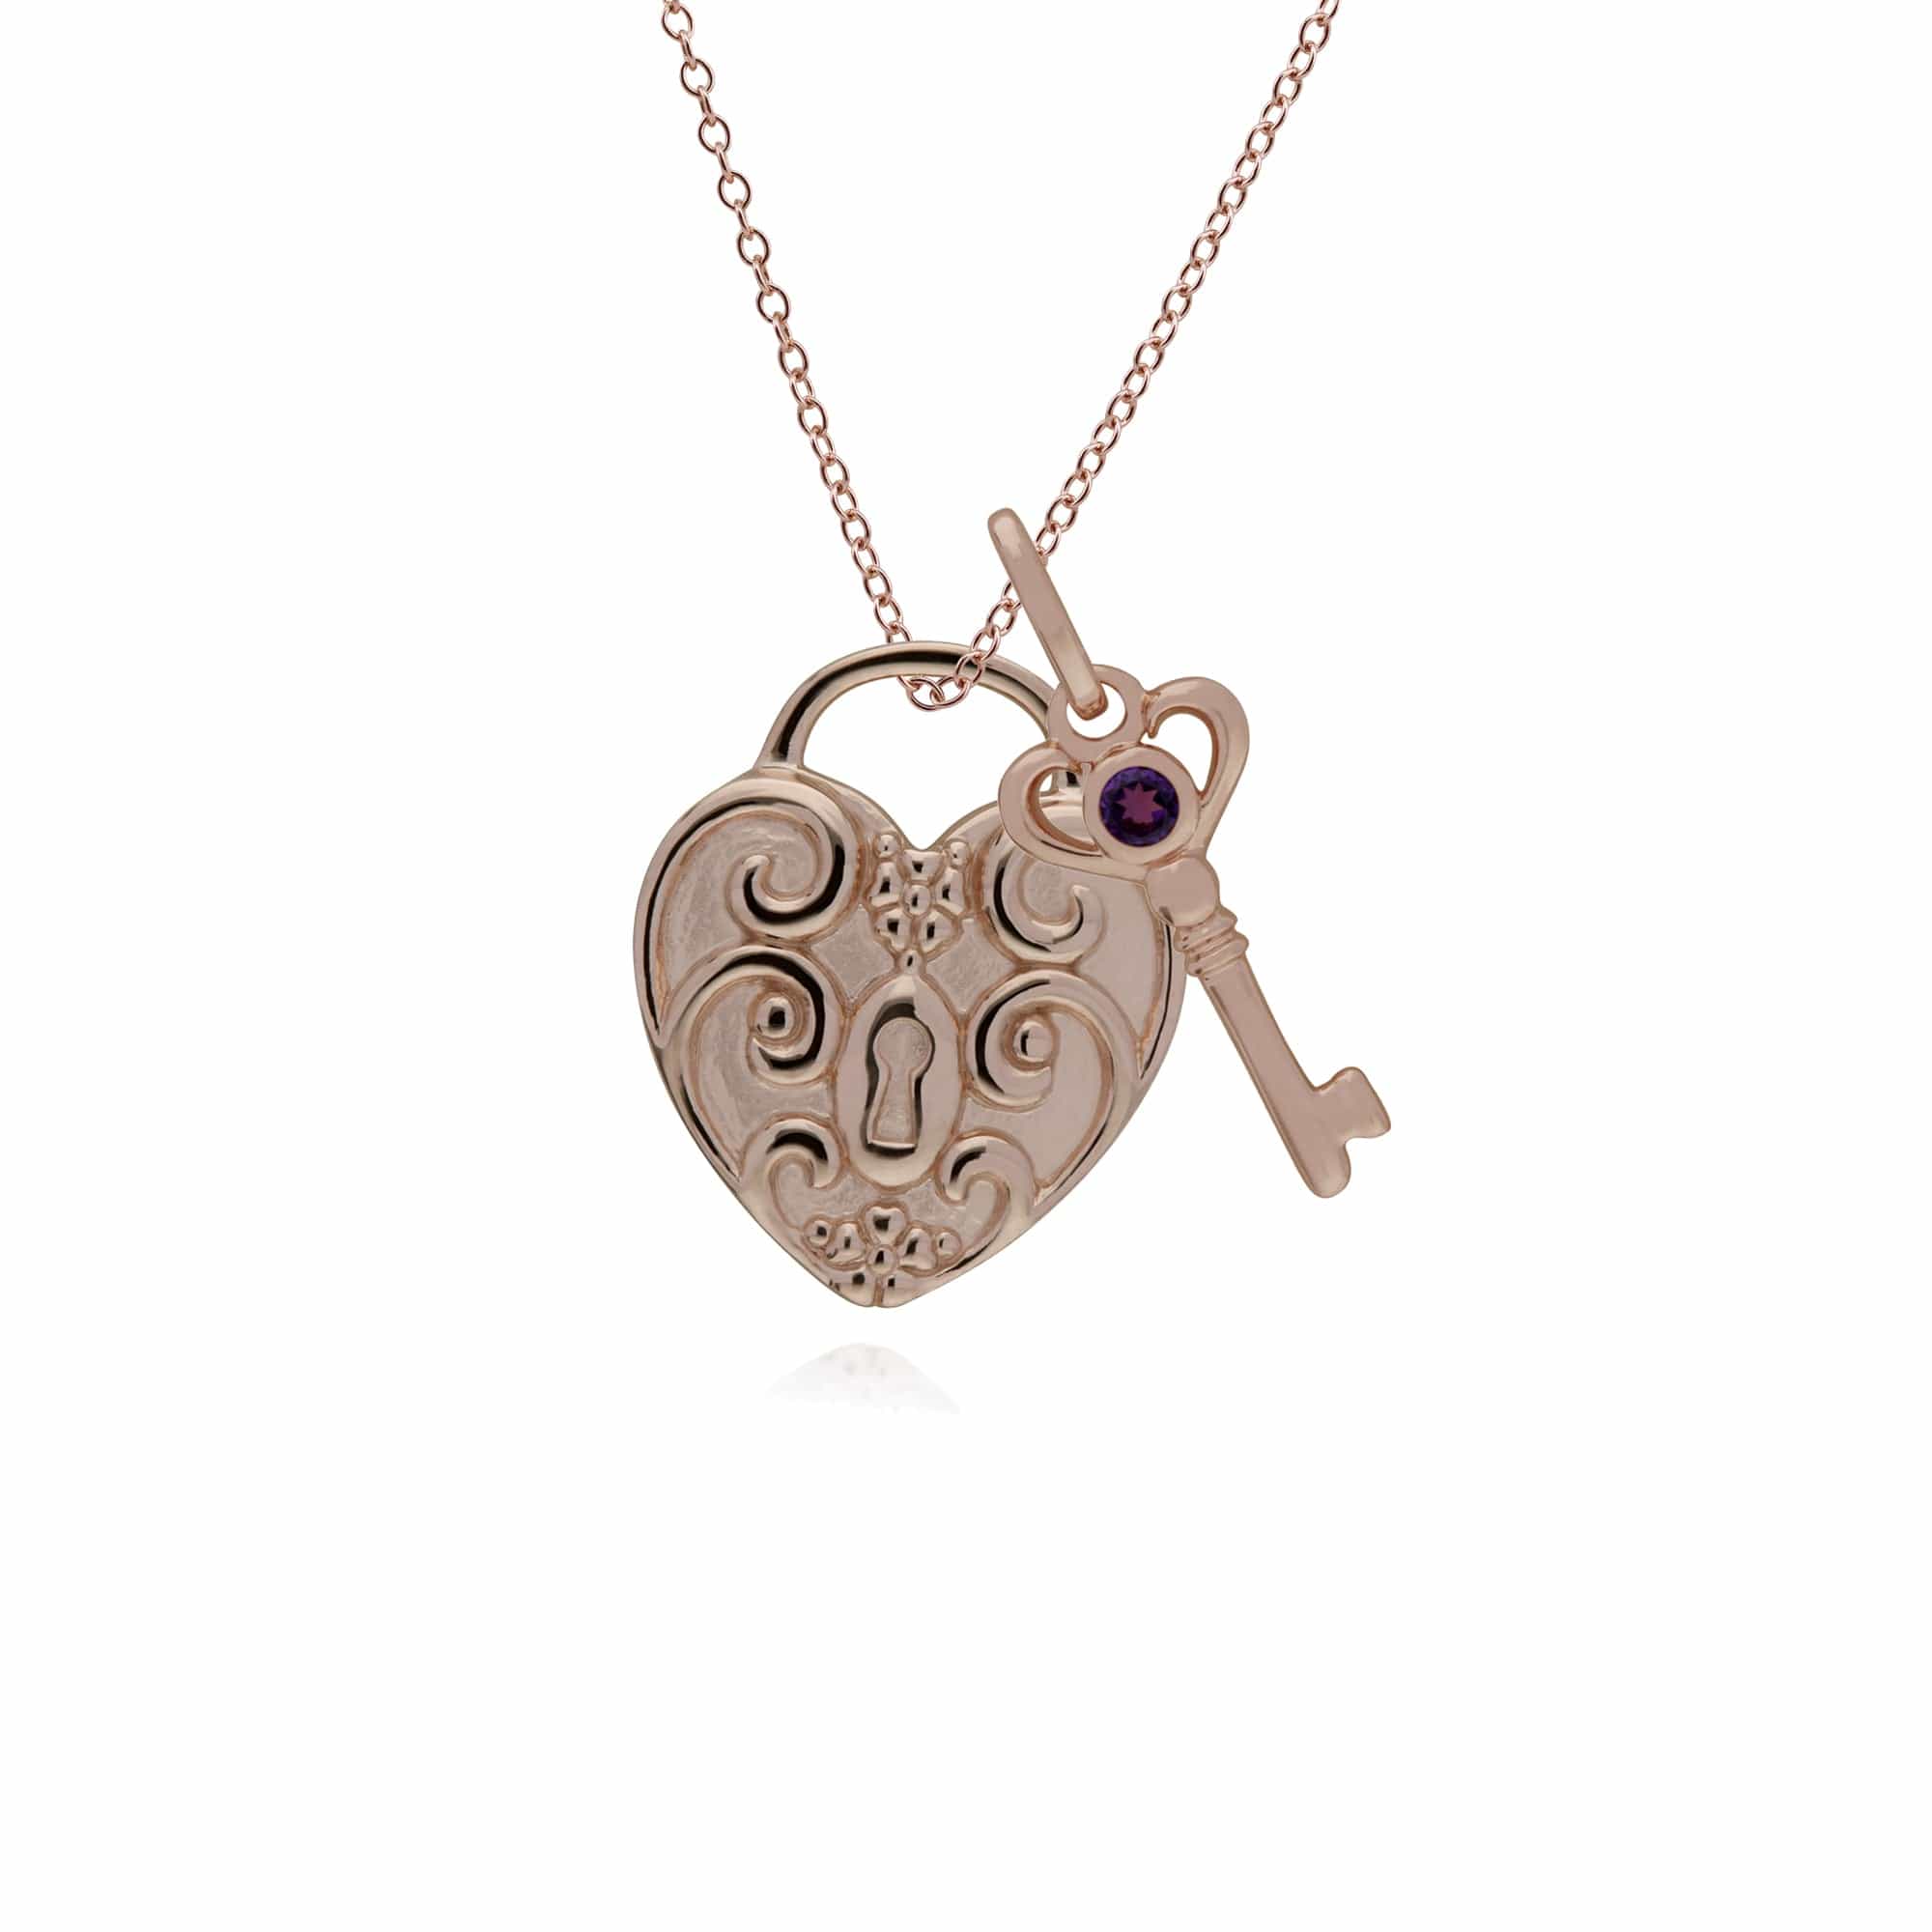 270P026304925-270P026501925 Classic Swirl Heart Lock Pendant & Amethyst Key Charm in Rose Gold Plated 925 Sterling Silver 1